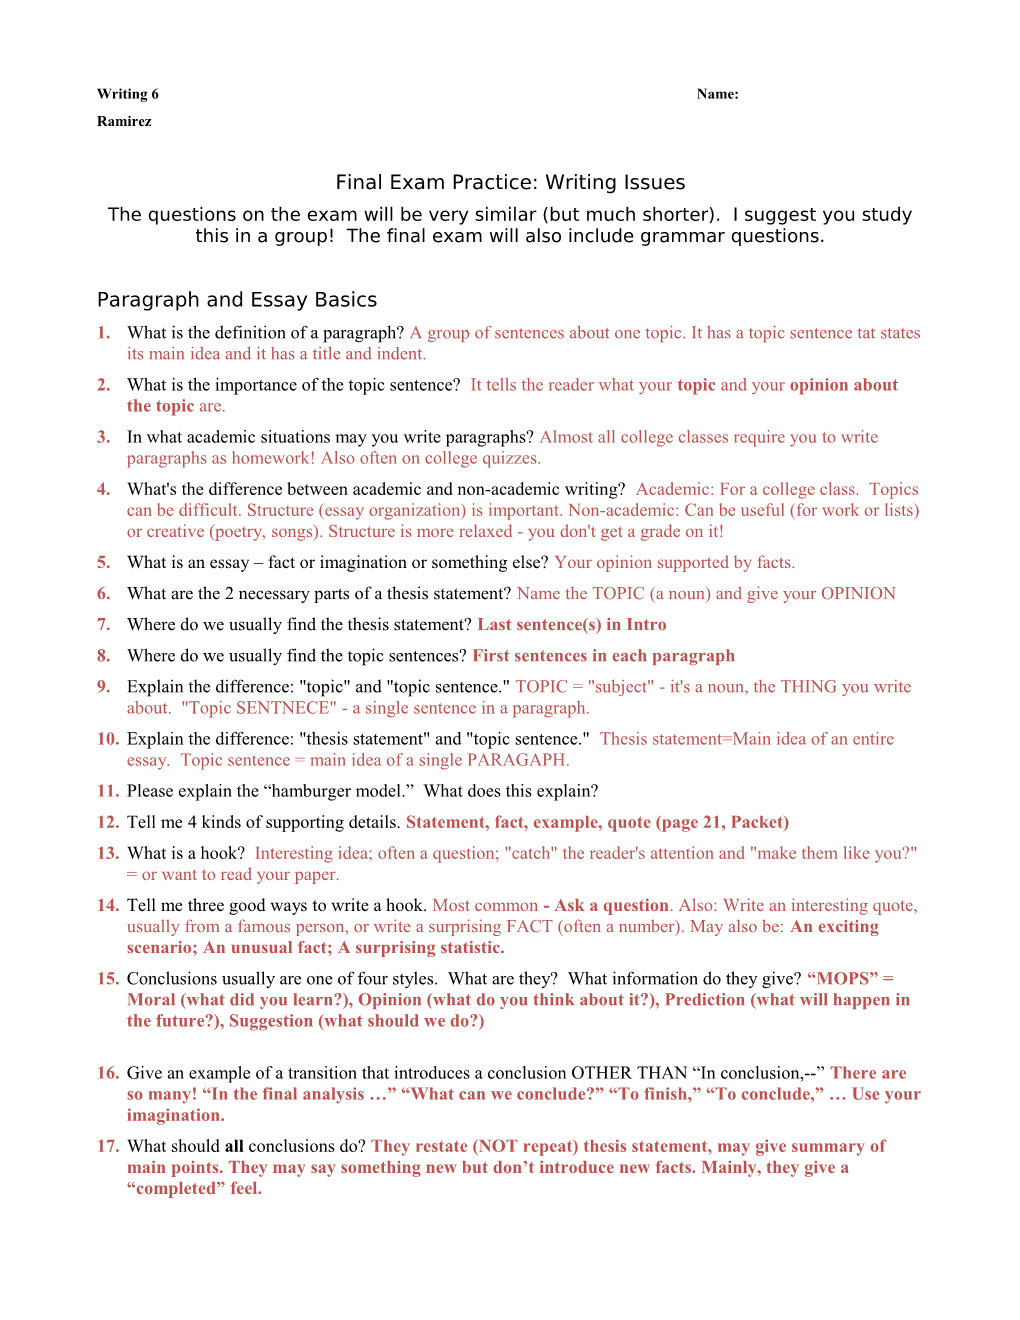 Final Exam Practice: Writing Issues